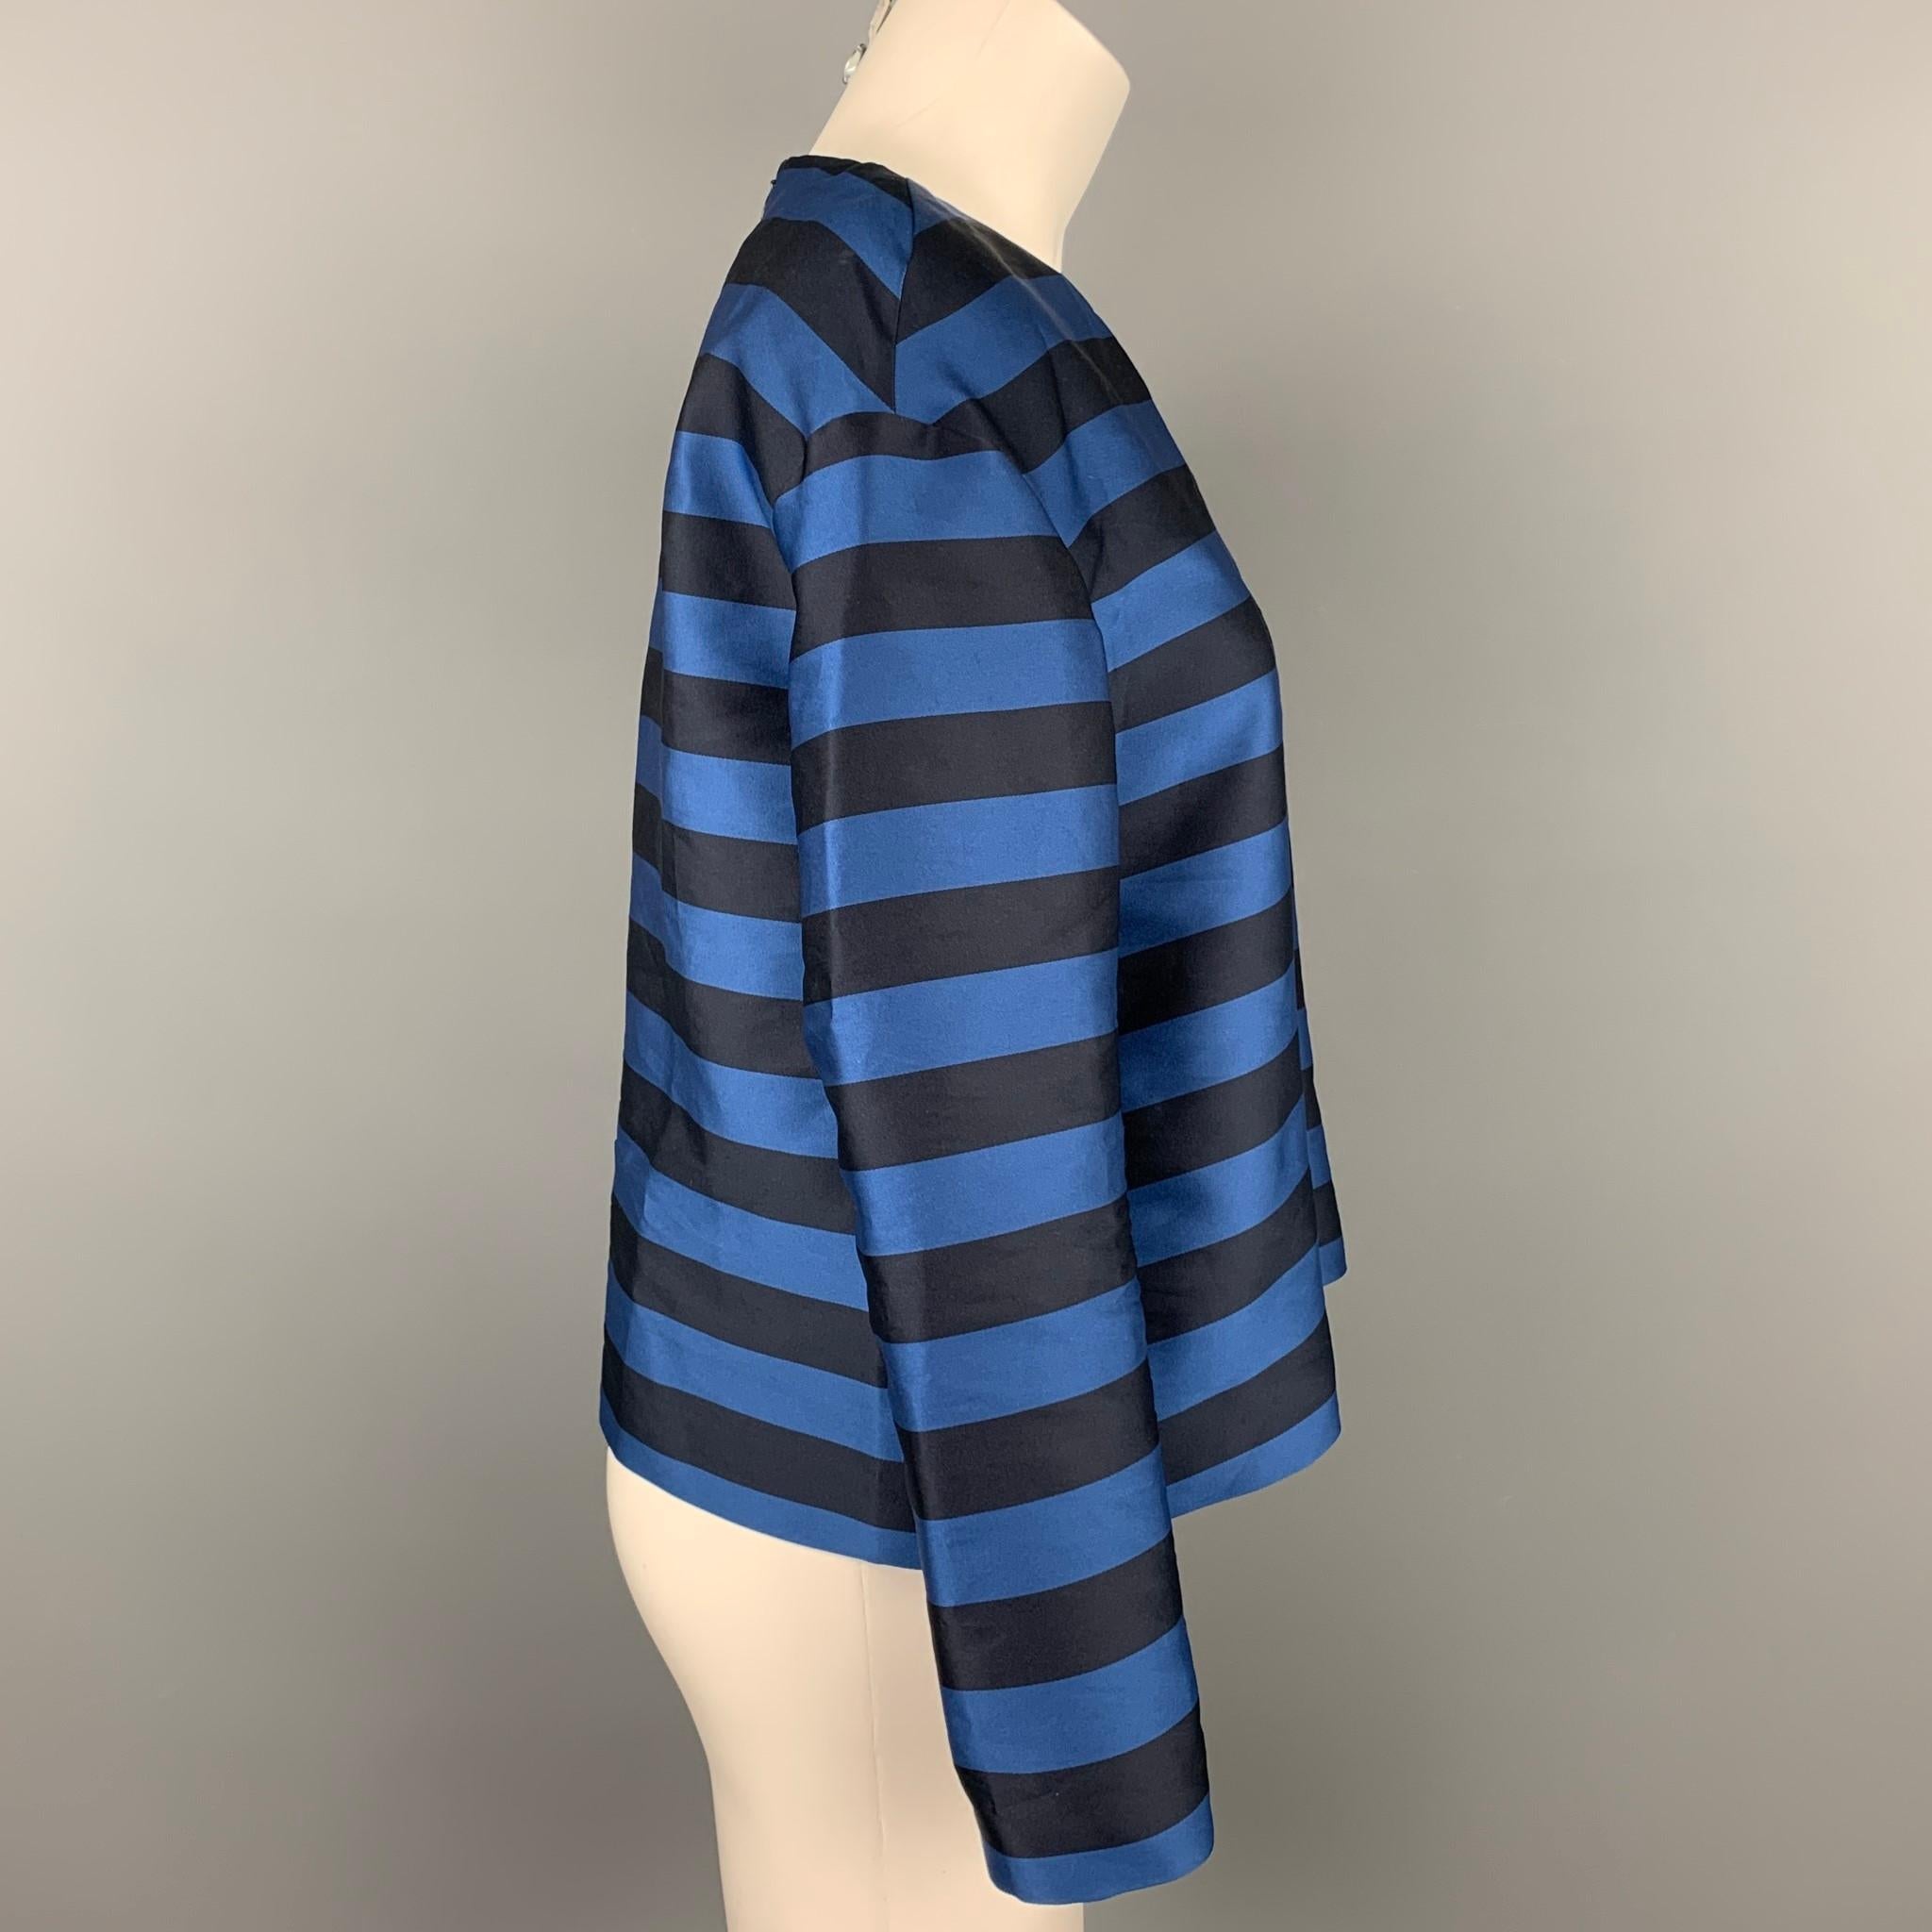 RED VALENTINO dress top comes in a navy & black stripe polyester / silk featuring a crew-neck and a back zip up closure. 

Very Good Pre-Owned Condition.
Marked: 40

Measurements:

Shoulder: 19 in.
Bust: 38 in.
Sleeve: 19.5 in.
Length: 21 in. 